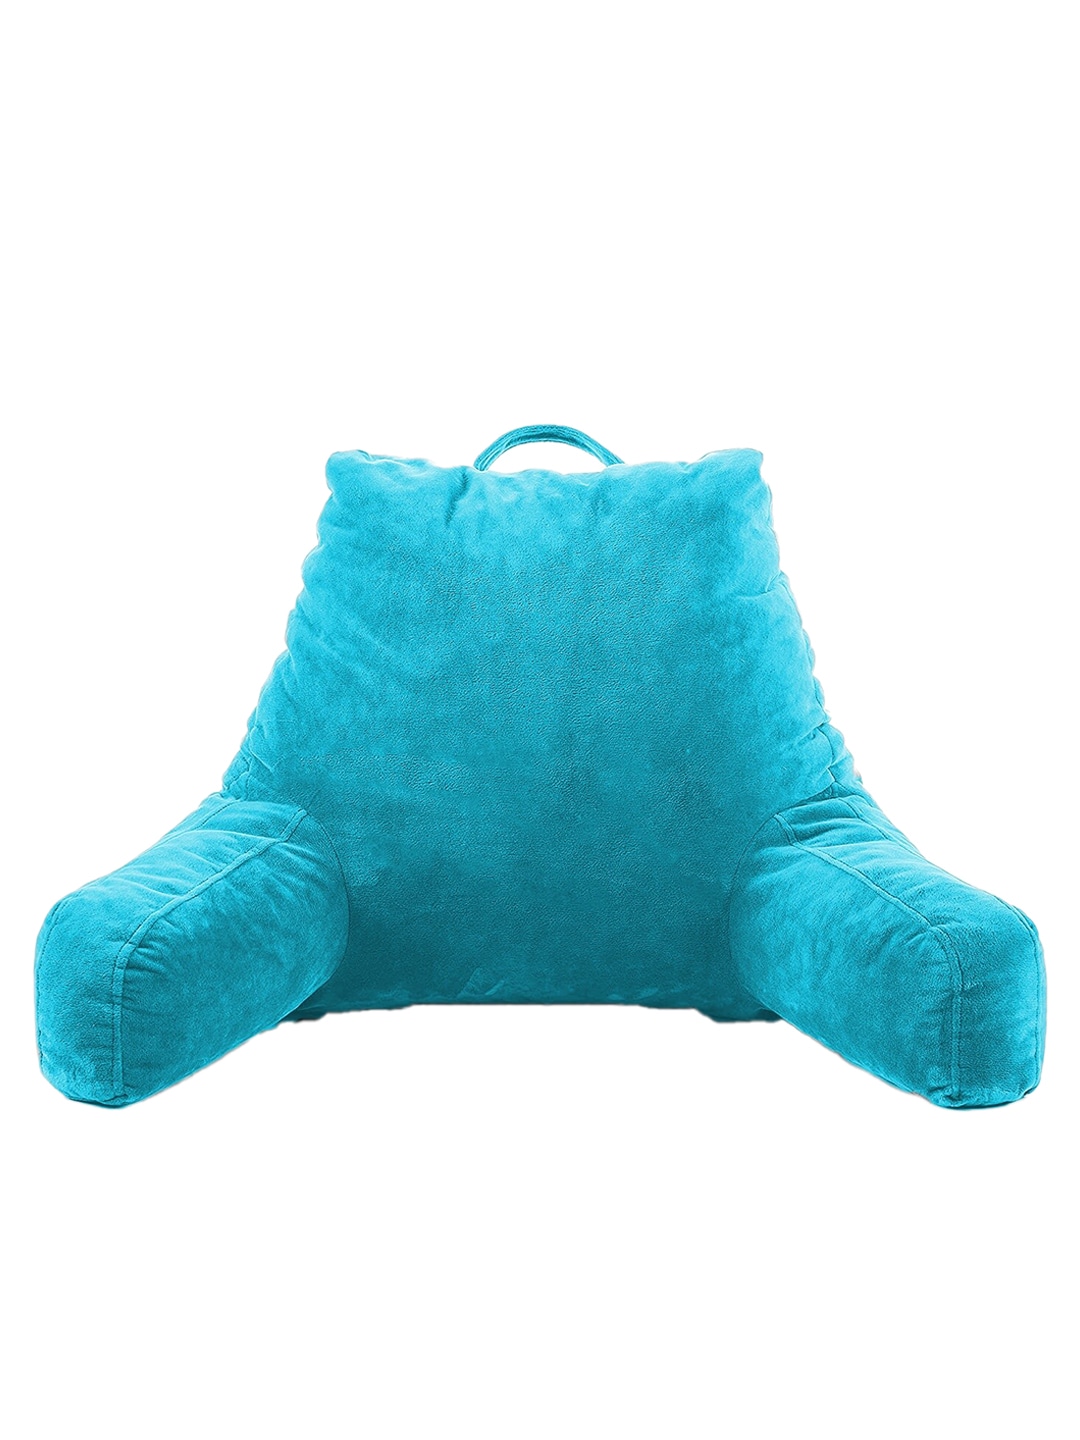 Pum Pum Turquoise Blue Solid Back Rest Reading Pillow with Hand Support Price in India